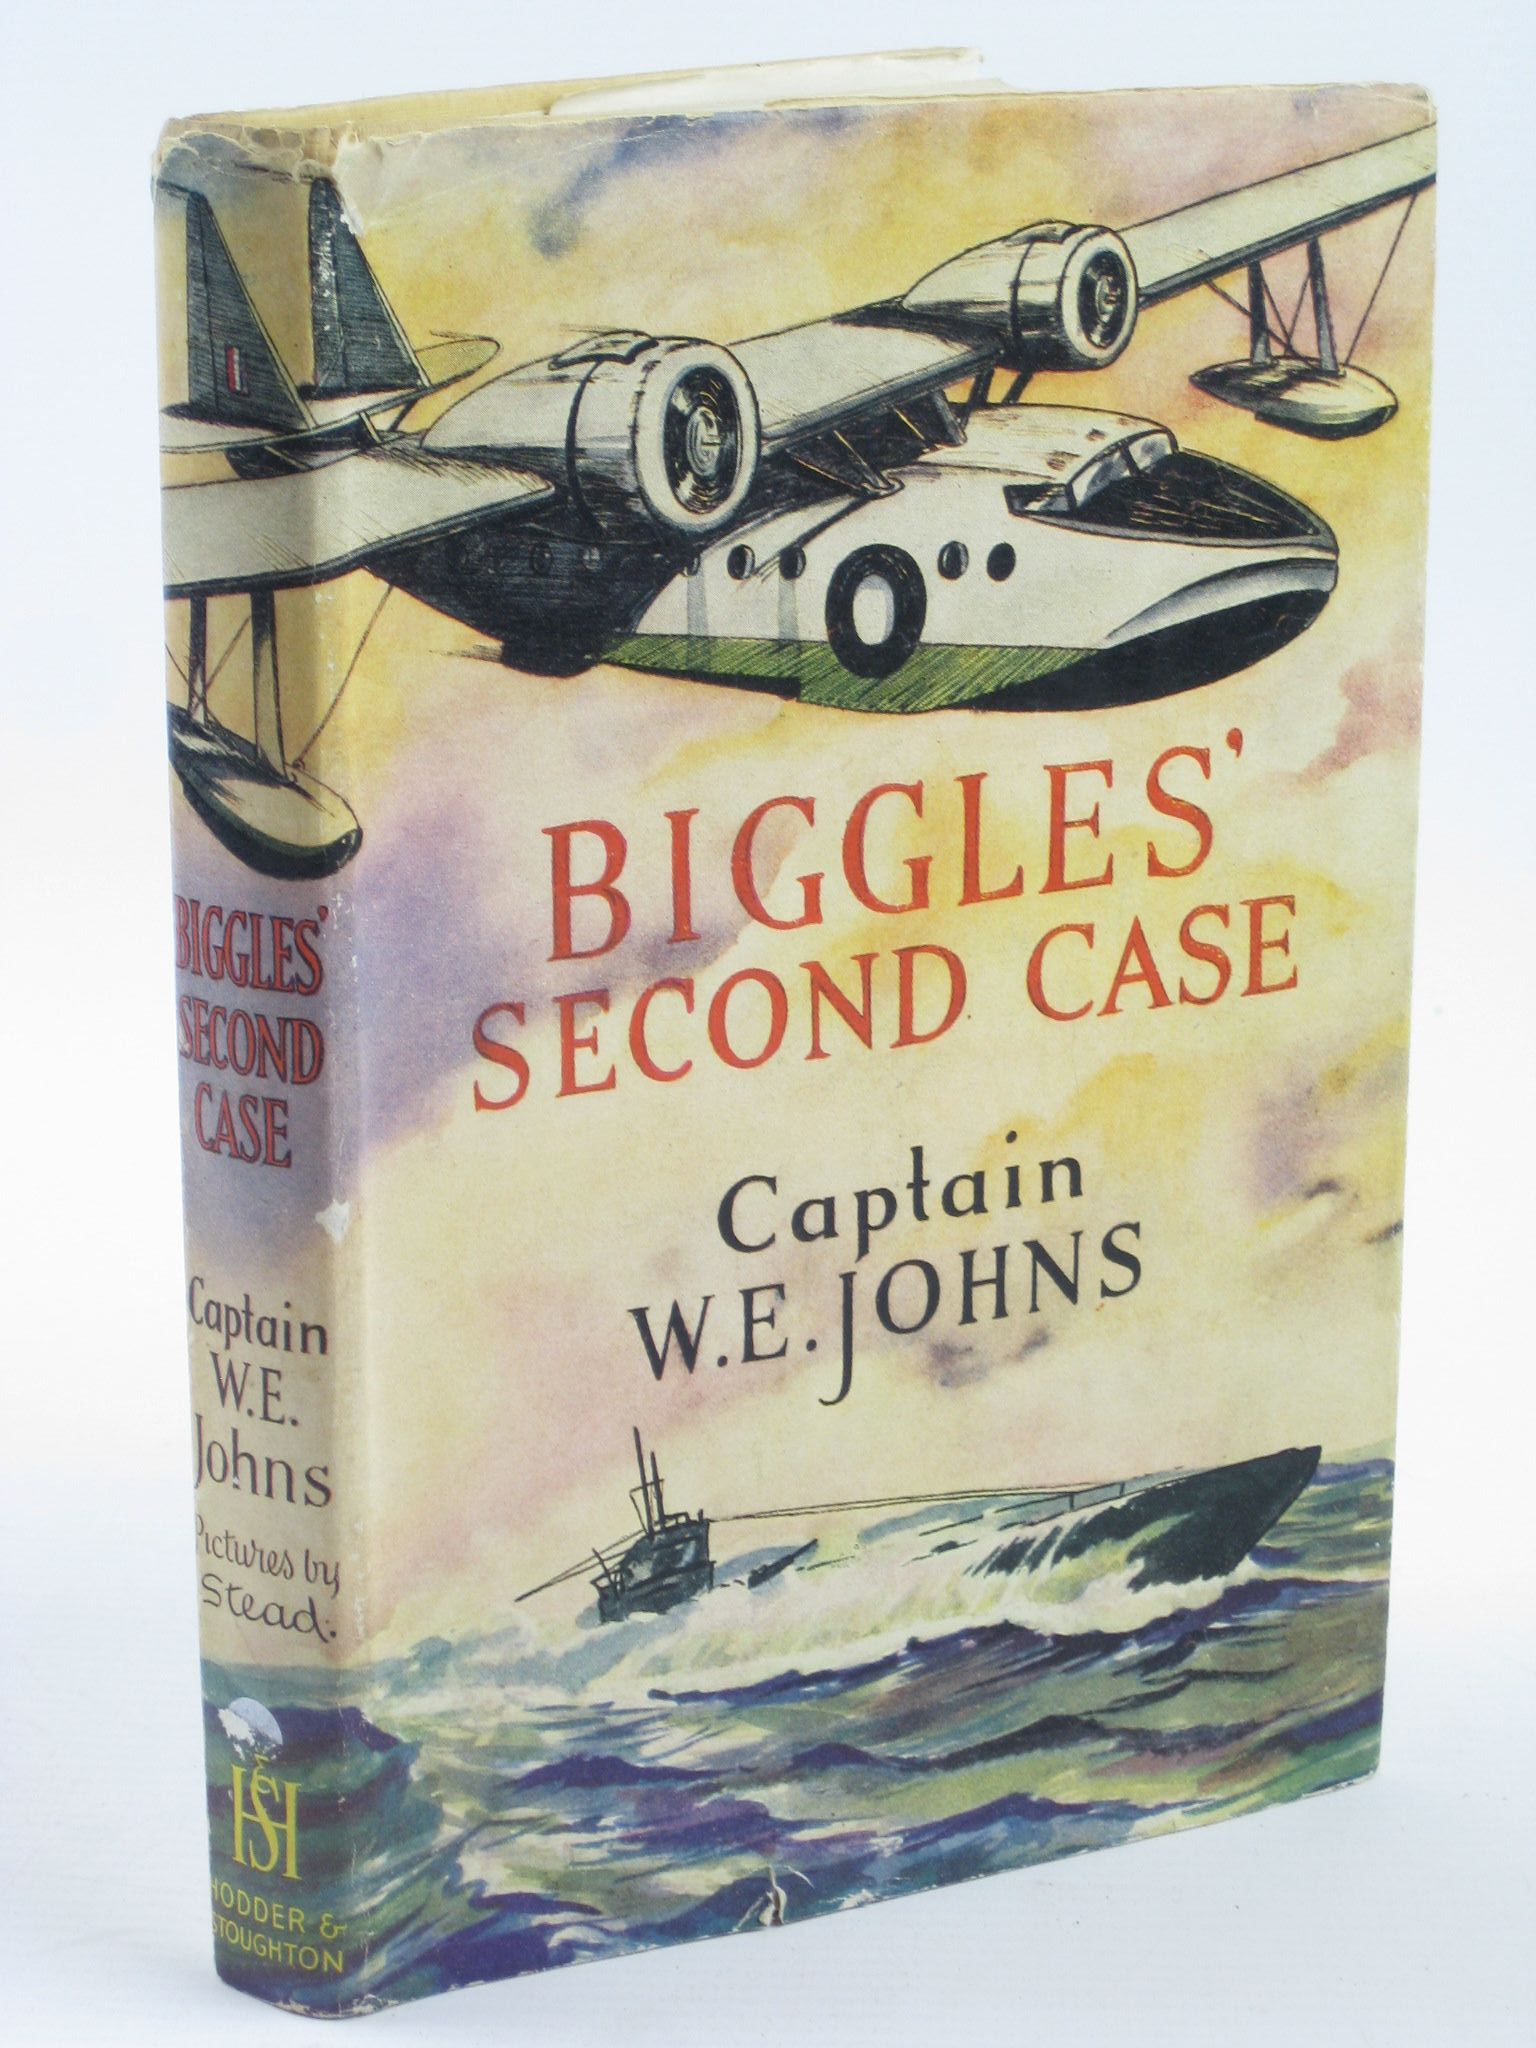 Cover of BIGGLES' SECOND CASE by W.E. Johns